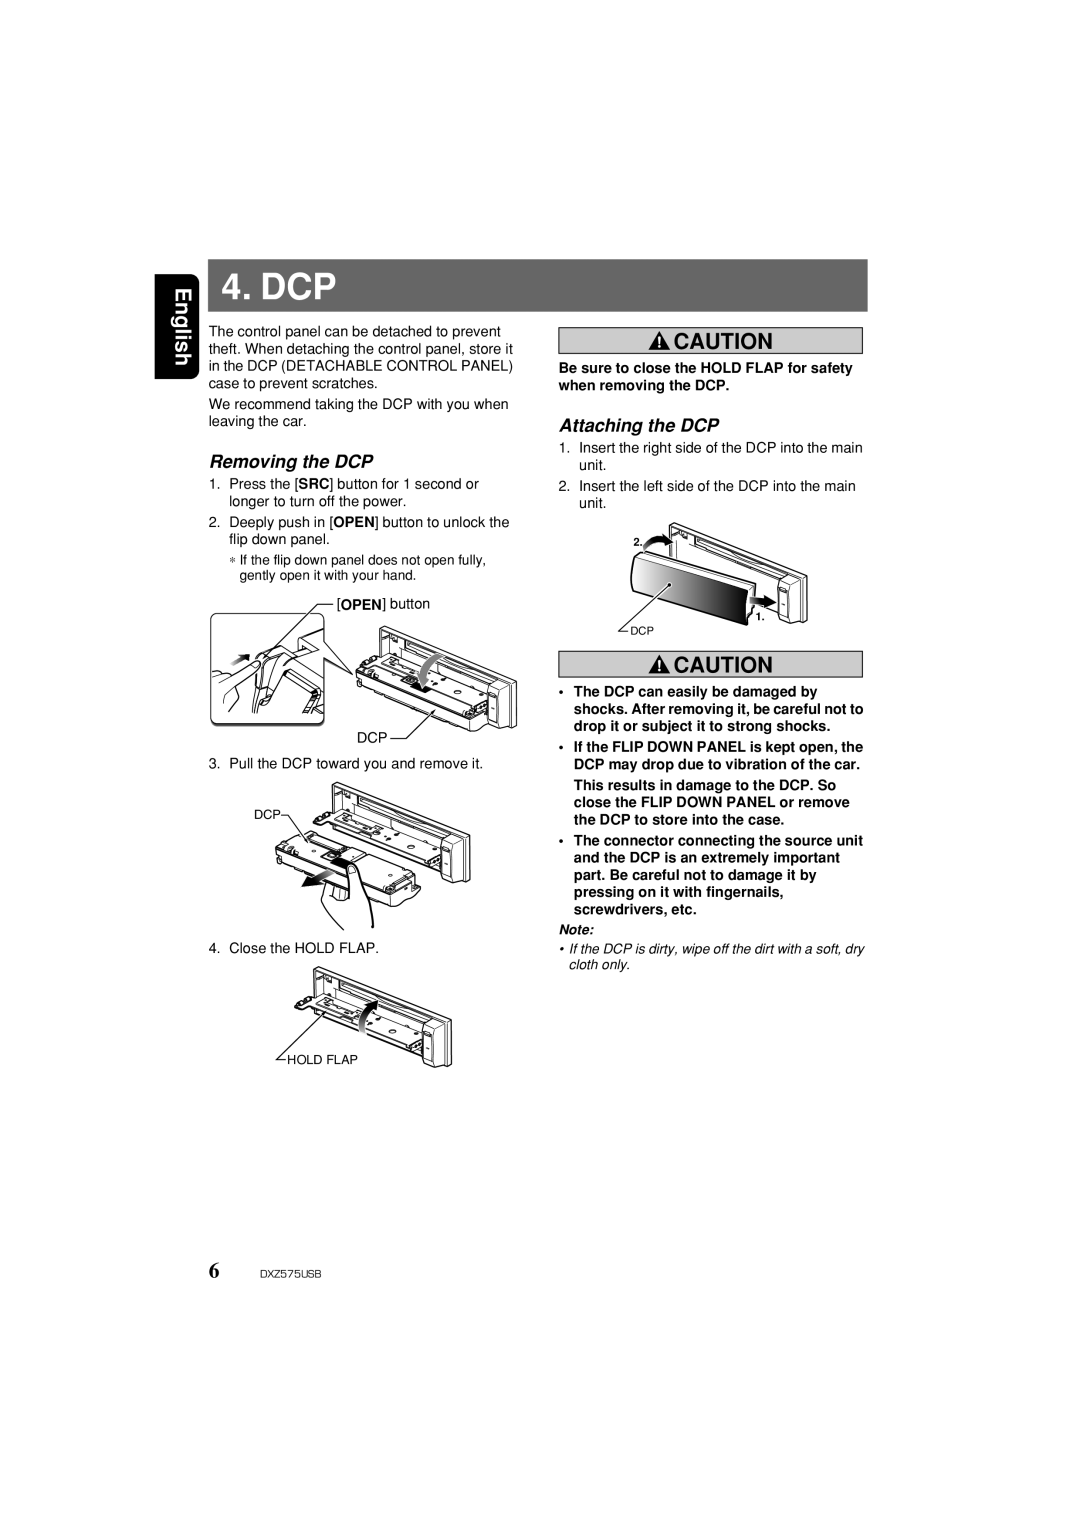 Clarion DXZ575USB owner manual Dcp, Removing the DCP, Attaching the DCP, English 